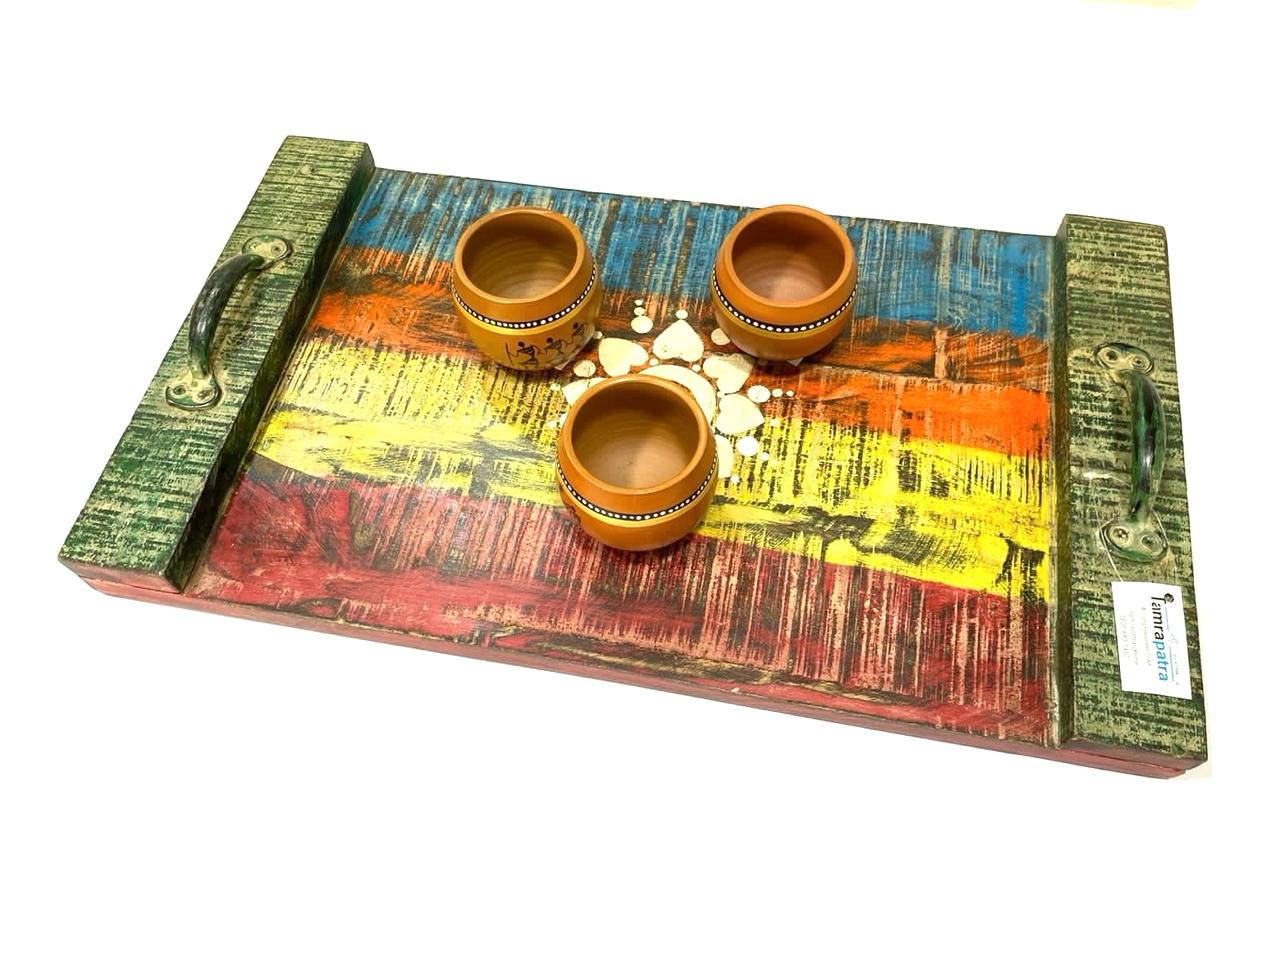 Wooden Traditional Trays HandPainted By Indian Artisans With Handles By Tamrapatra